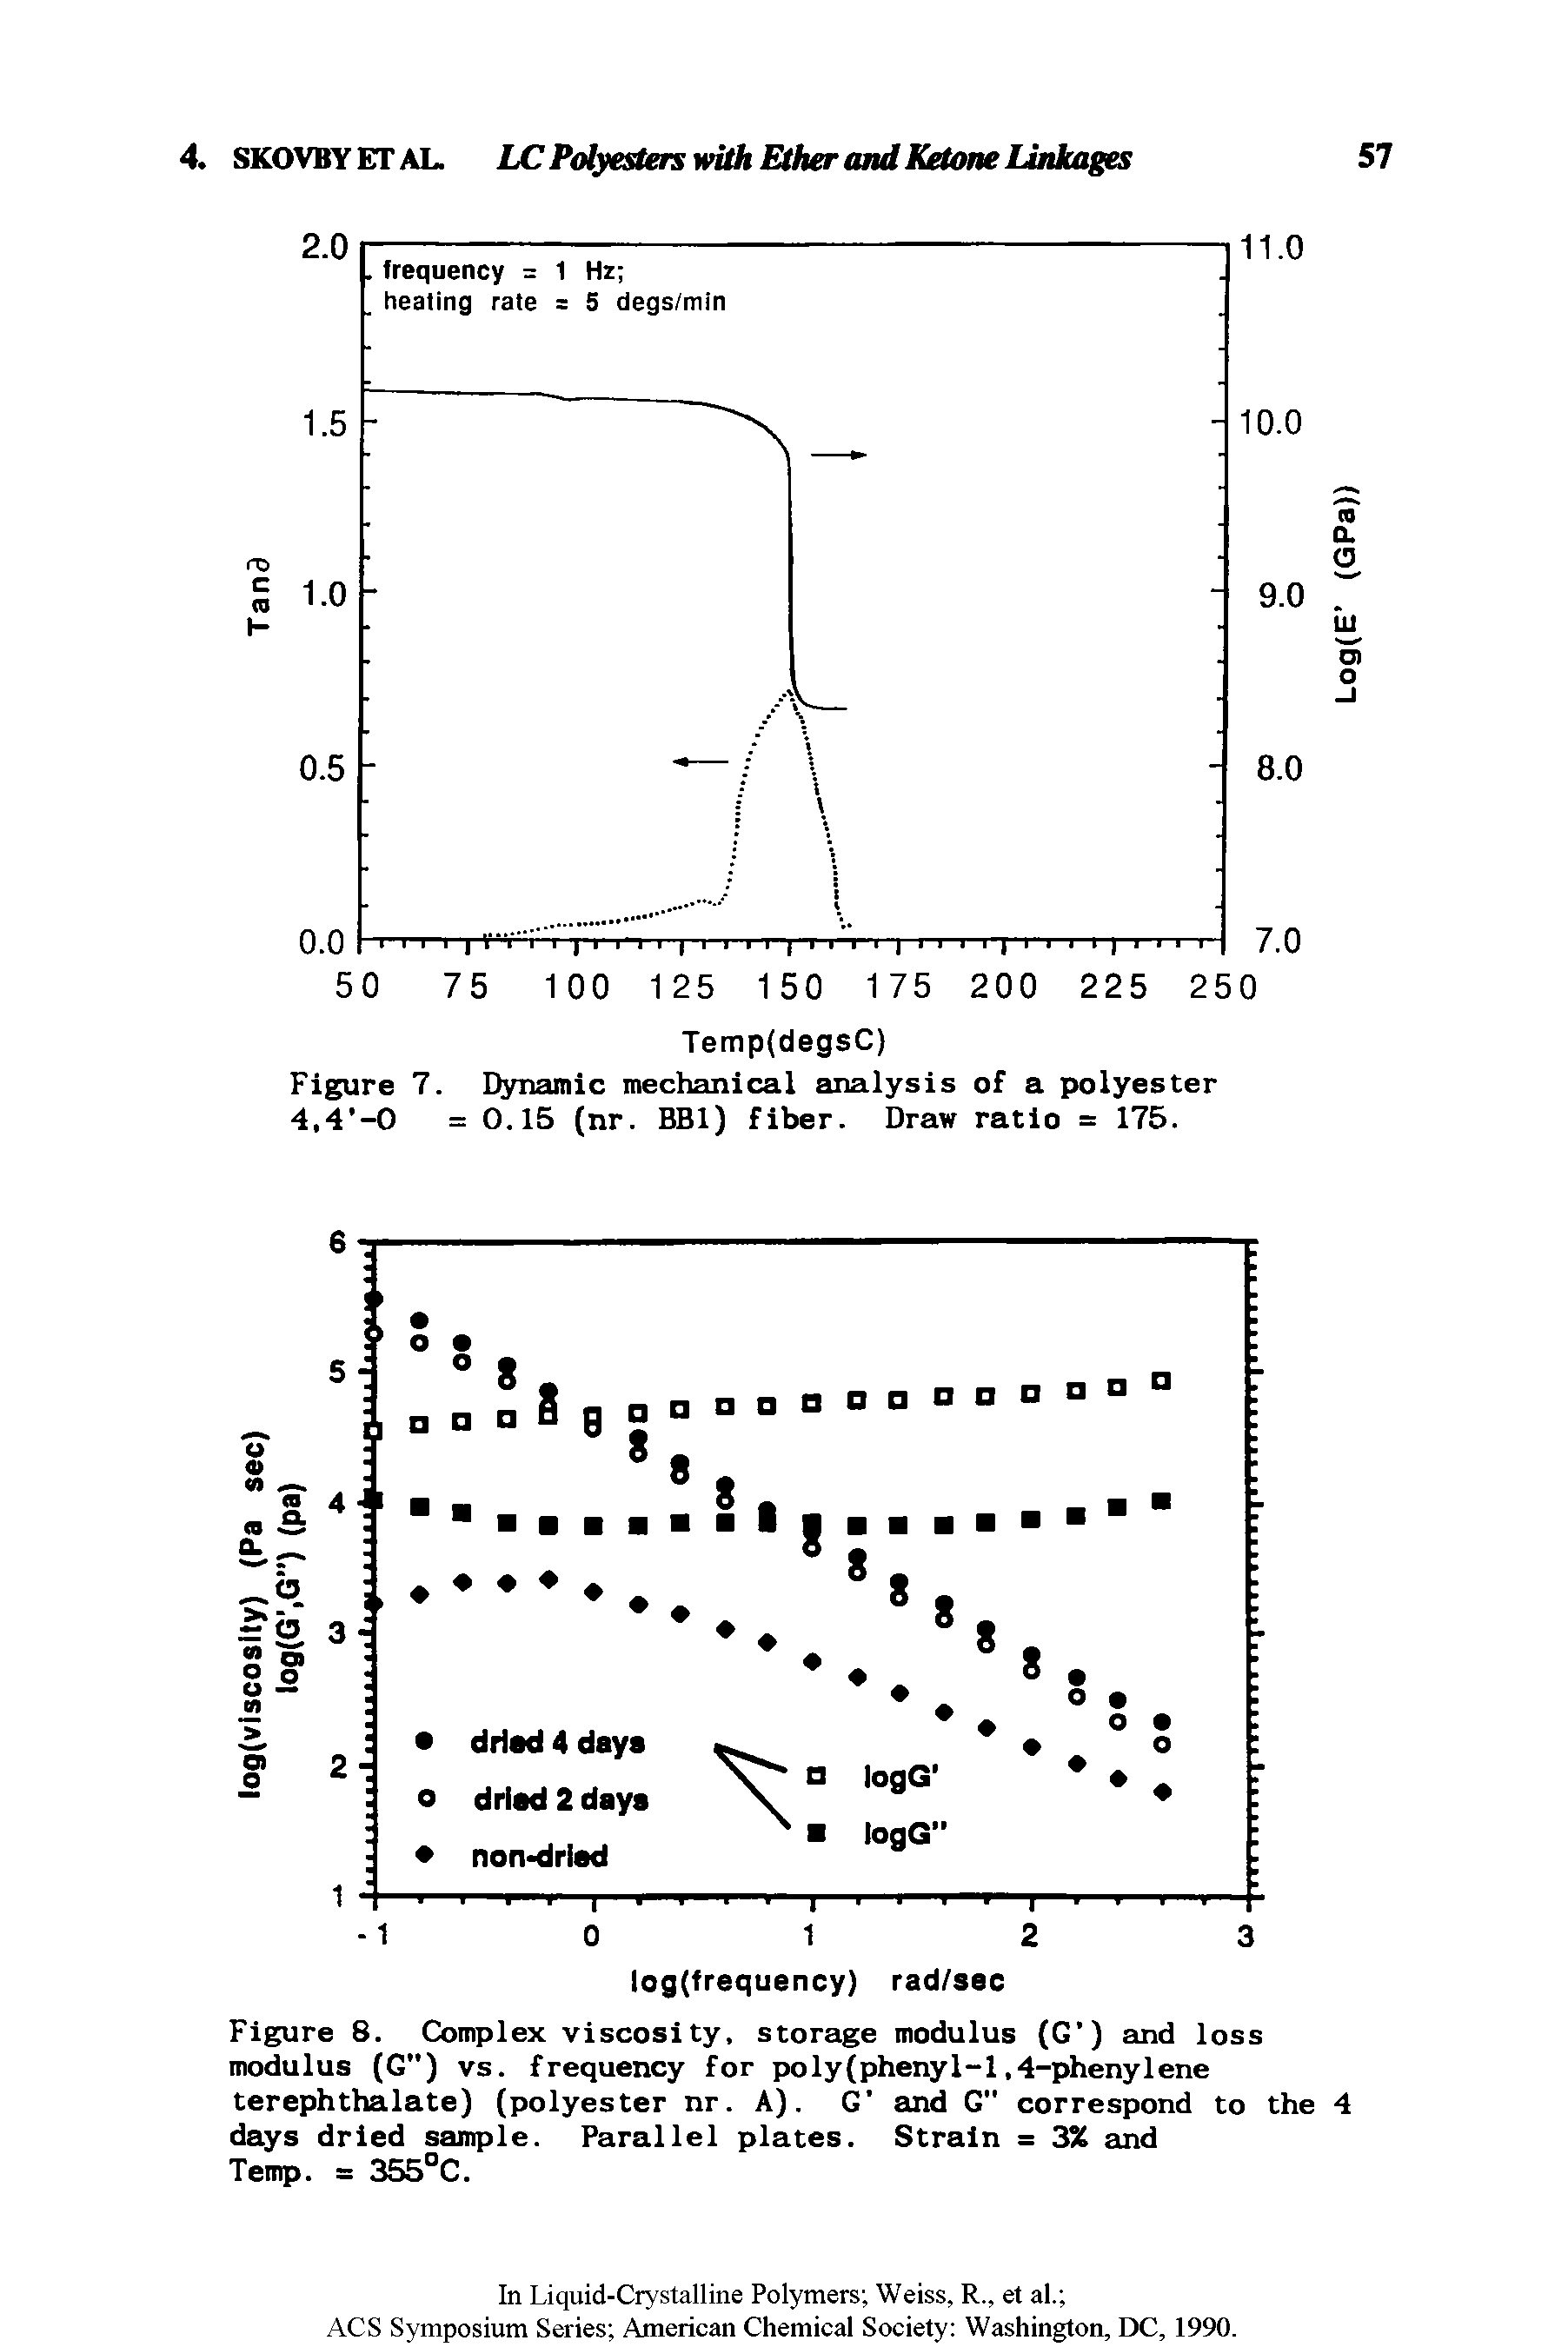 Figure 8. Complex viscosity, storage modulus (G ) and loss modulus (G") vs. frequency for poly(pheny1-1,4-phenylene terephthalate) (polyester nr. A). G and G" correspond to the 4 days dried sample. Parallel plates. Strain = 3% and Temp. = 355°C.